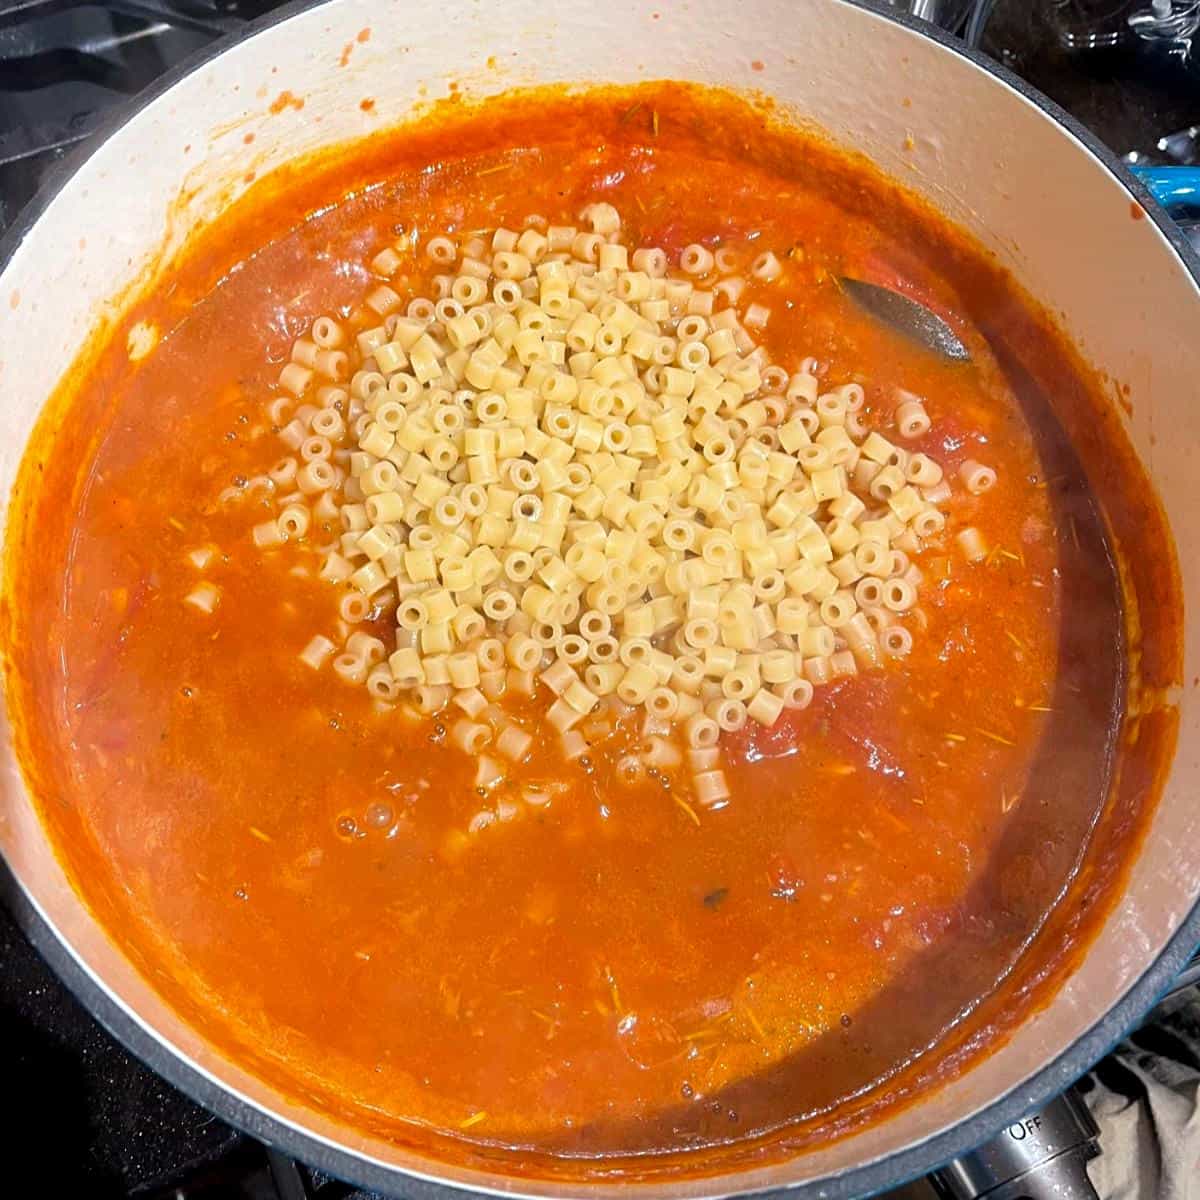 Ditalini pasta added to tomato and stock in soup.